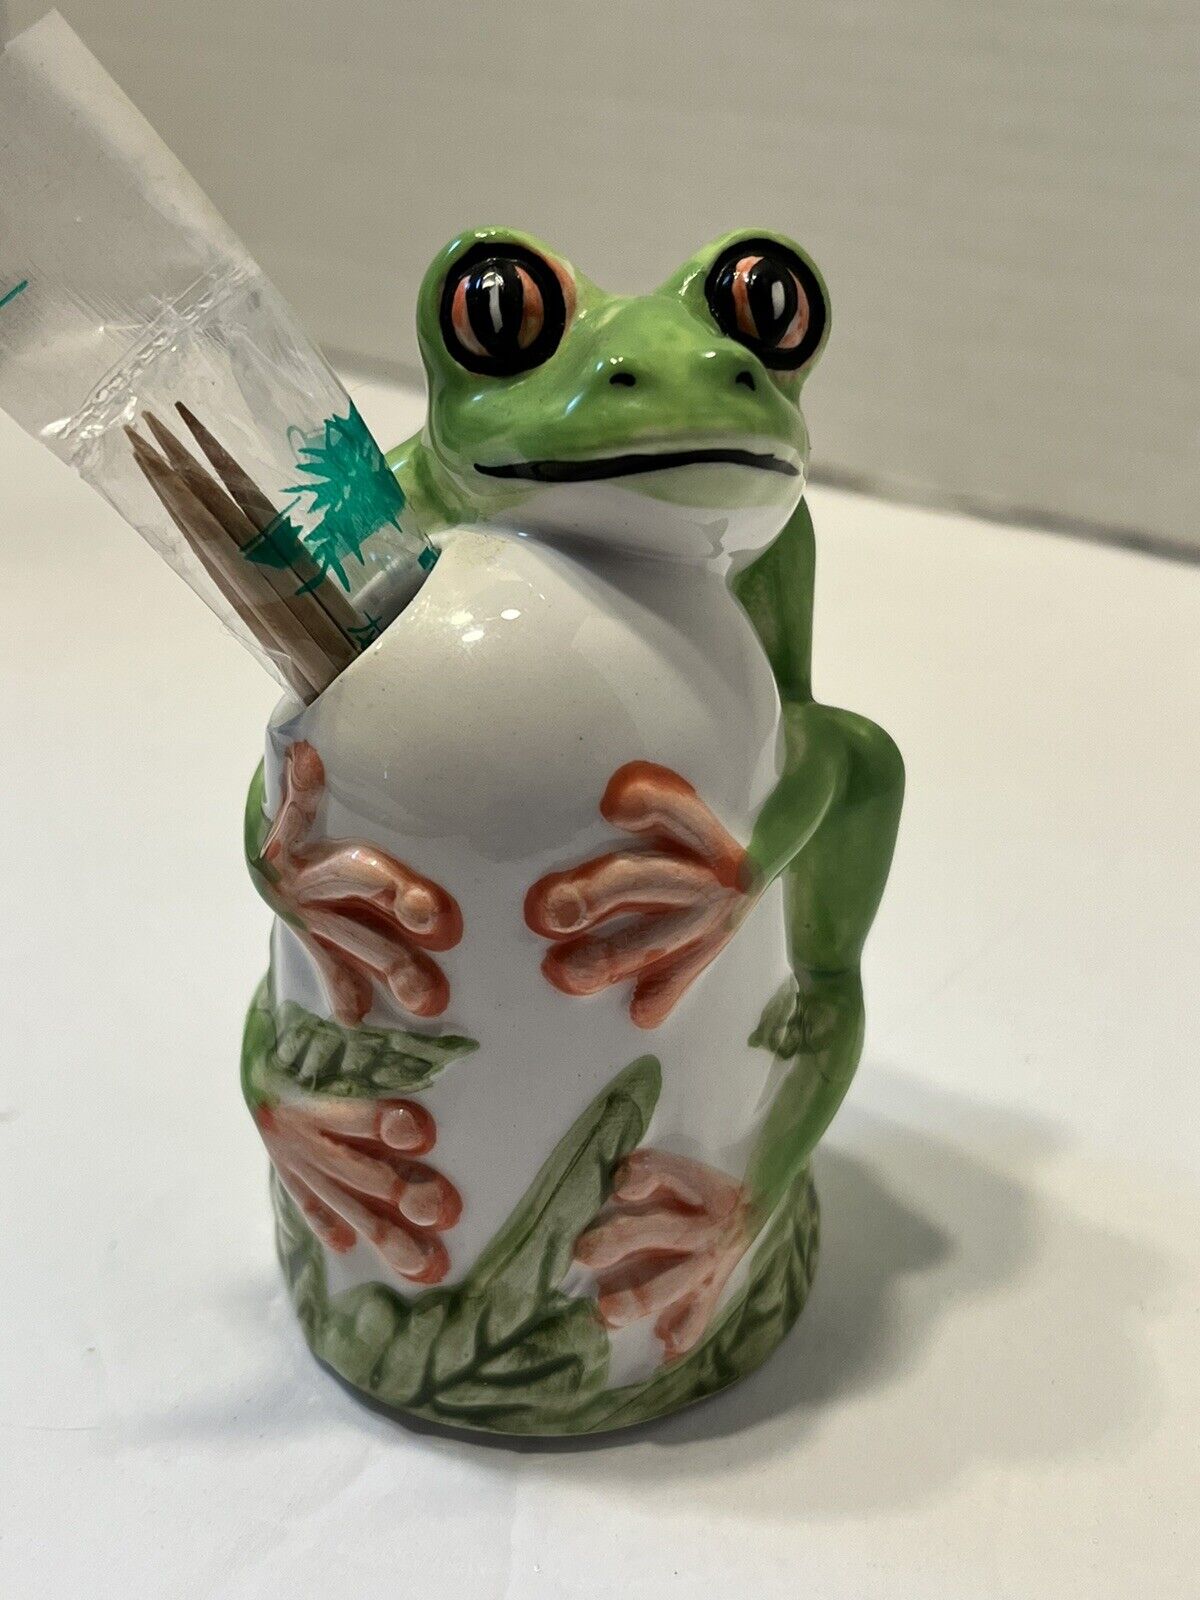 Vintage Kitschy Green Ceramic Frog Toothpick Holder Agiftcorp Hand Painted Read